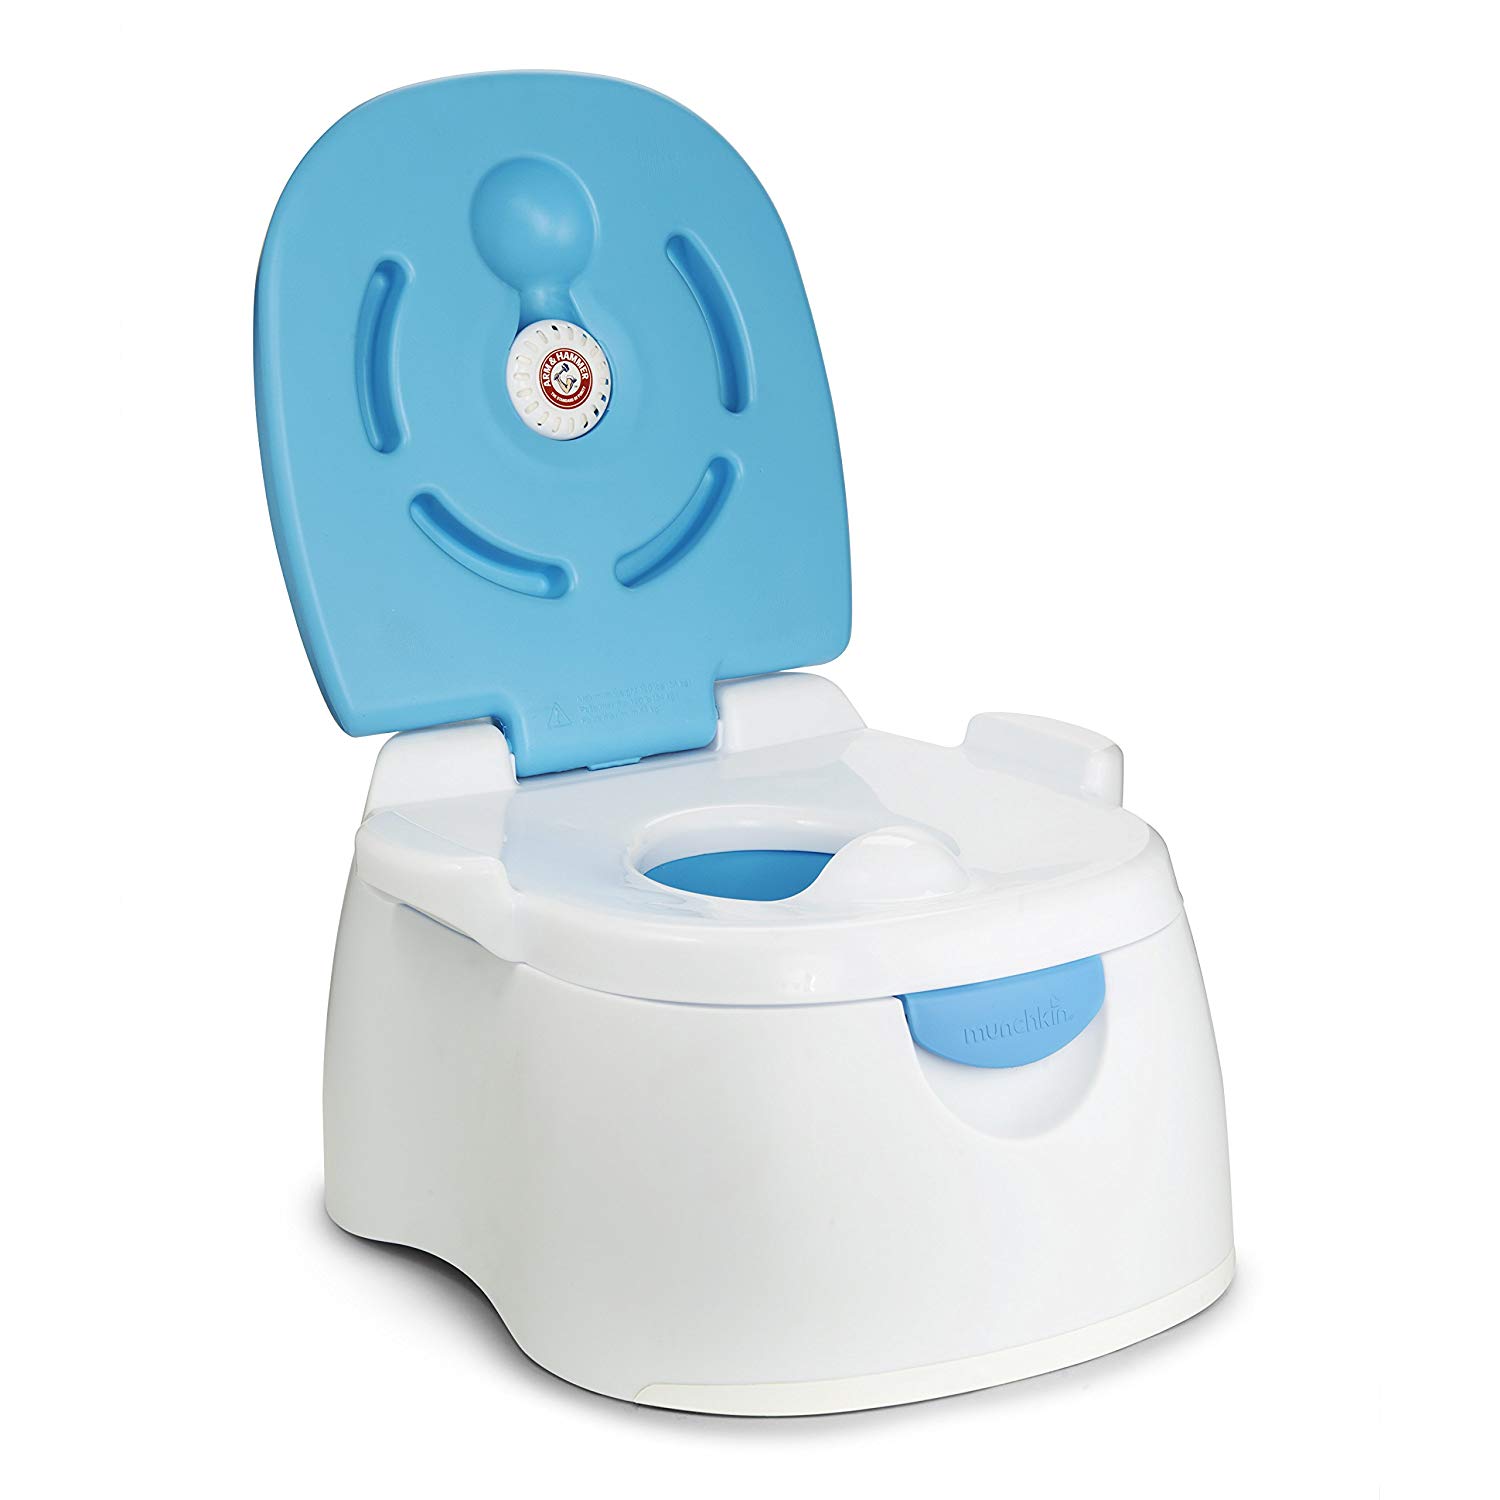 Munchkin Arm & Hammer Multi-Stage 3-in-1 Potty, Blue | Top Toys